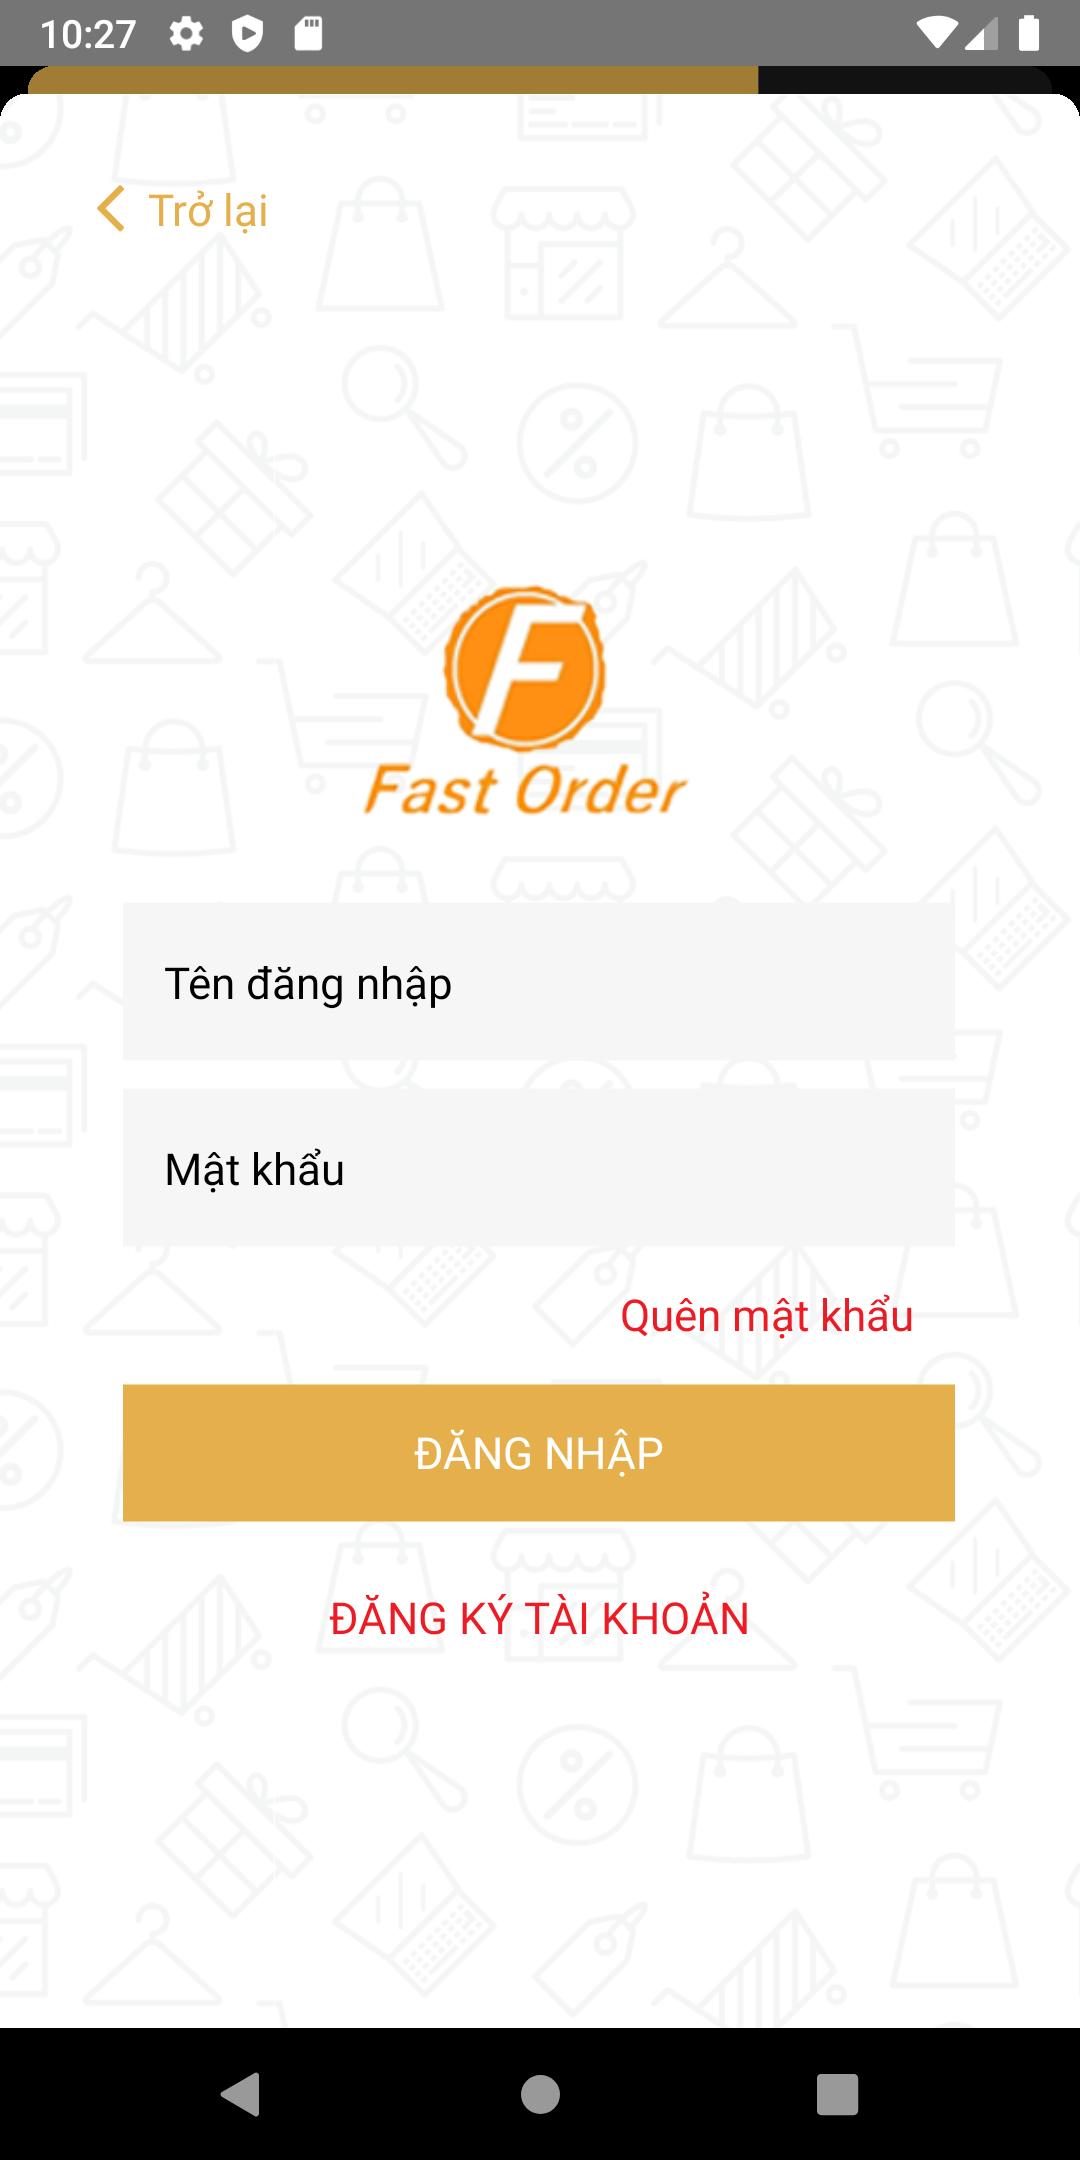 Fast order